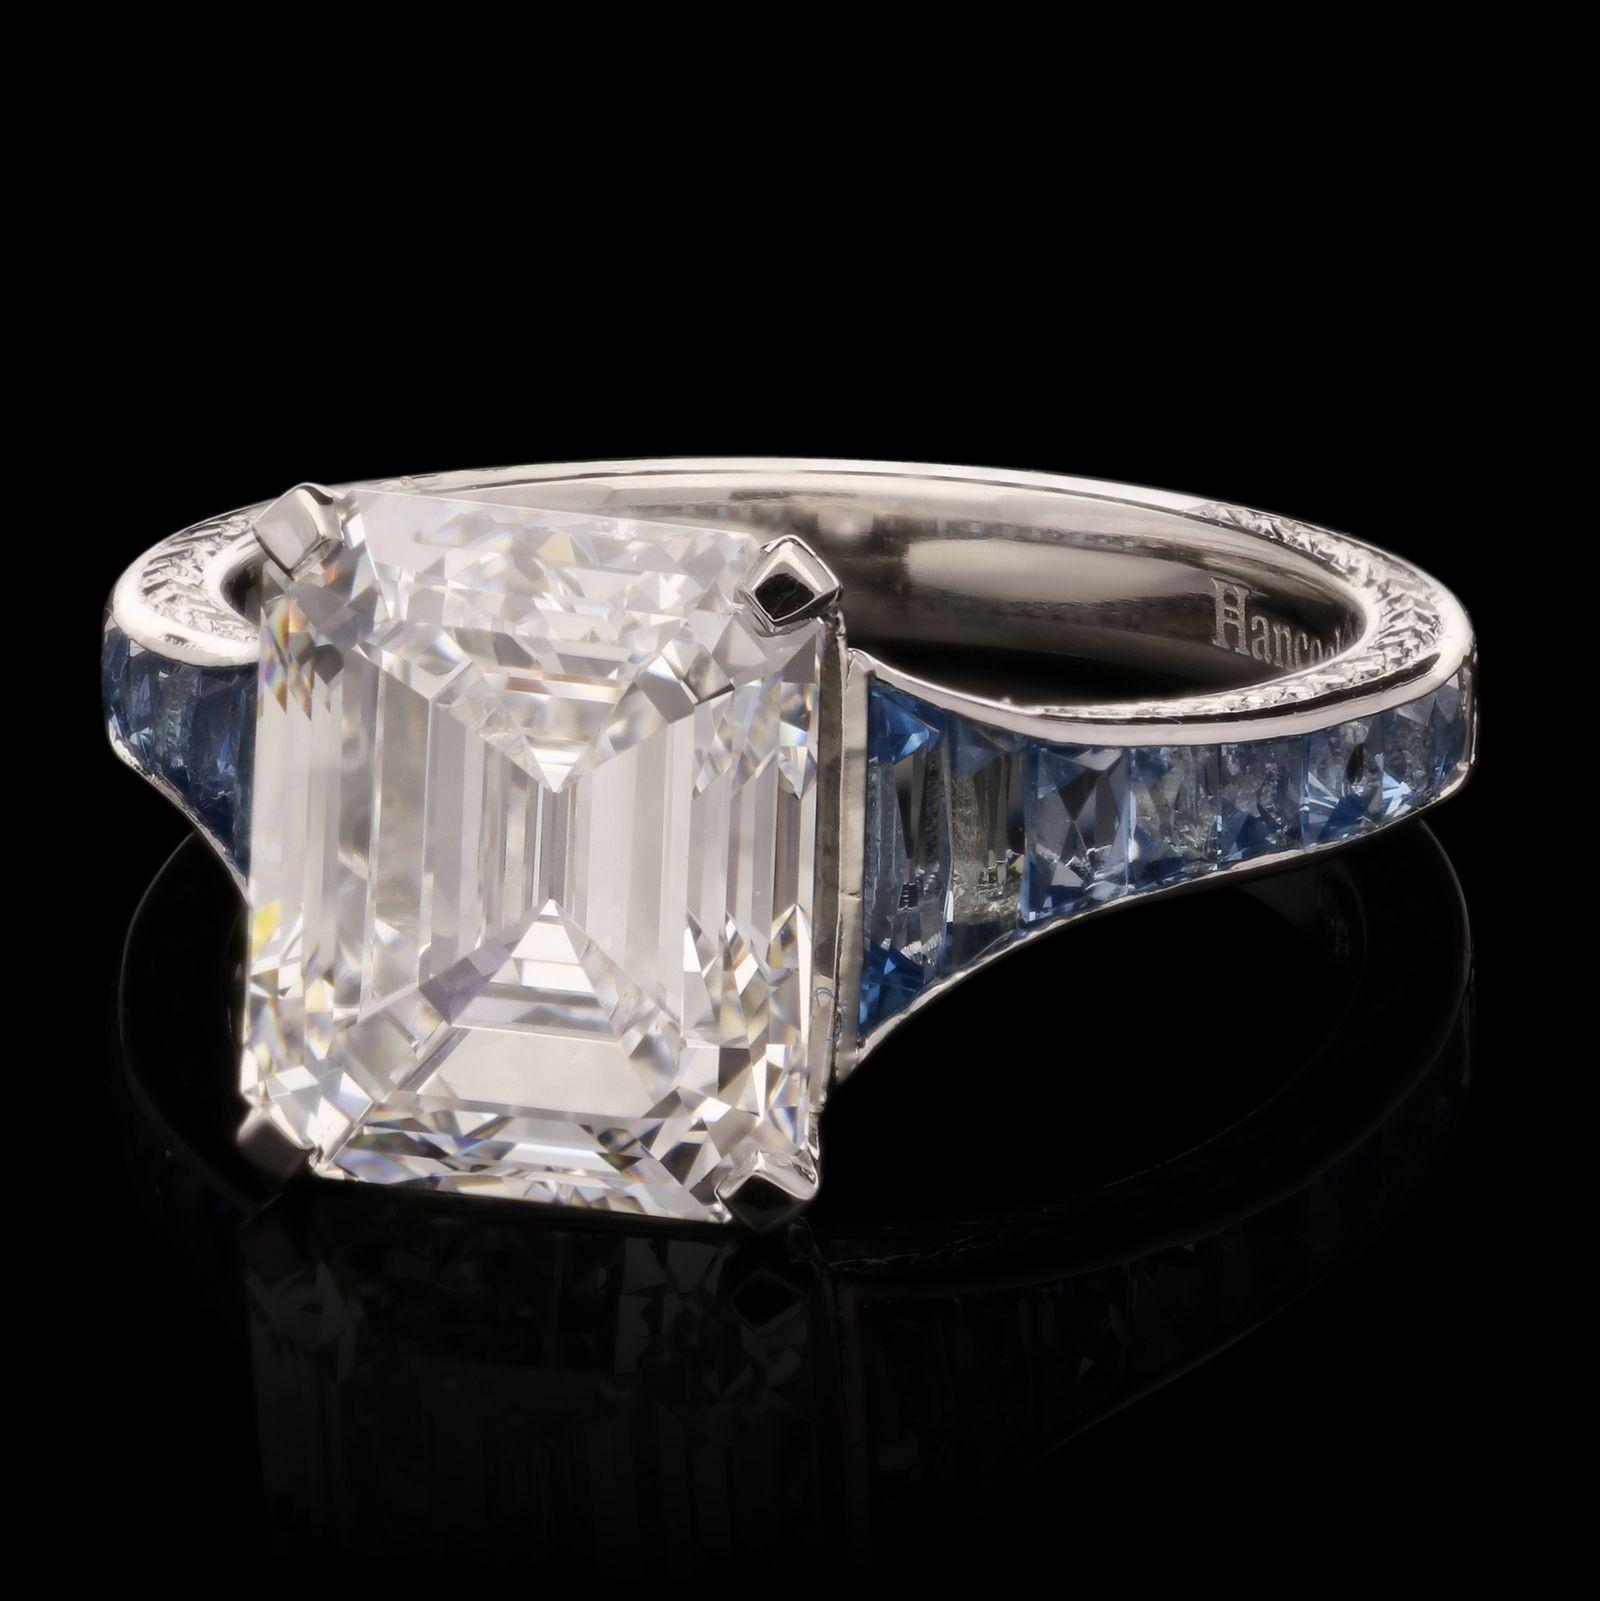 A beautiful old cut diamond and aquamarine ring by Hancocks, centred with a wonderful emerald-cut diamond weighing 4.48ct and of D colour and VS2 clarity in claw setting between shoulders channel set with calibre French-cut aquamarines, all in a